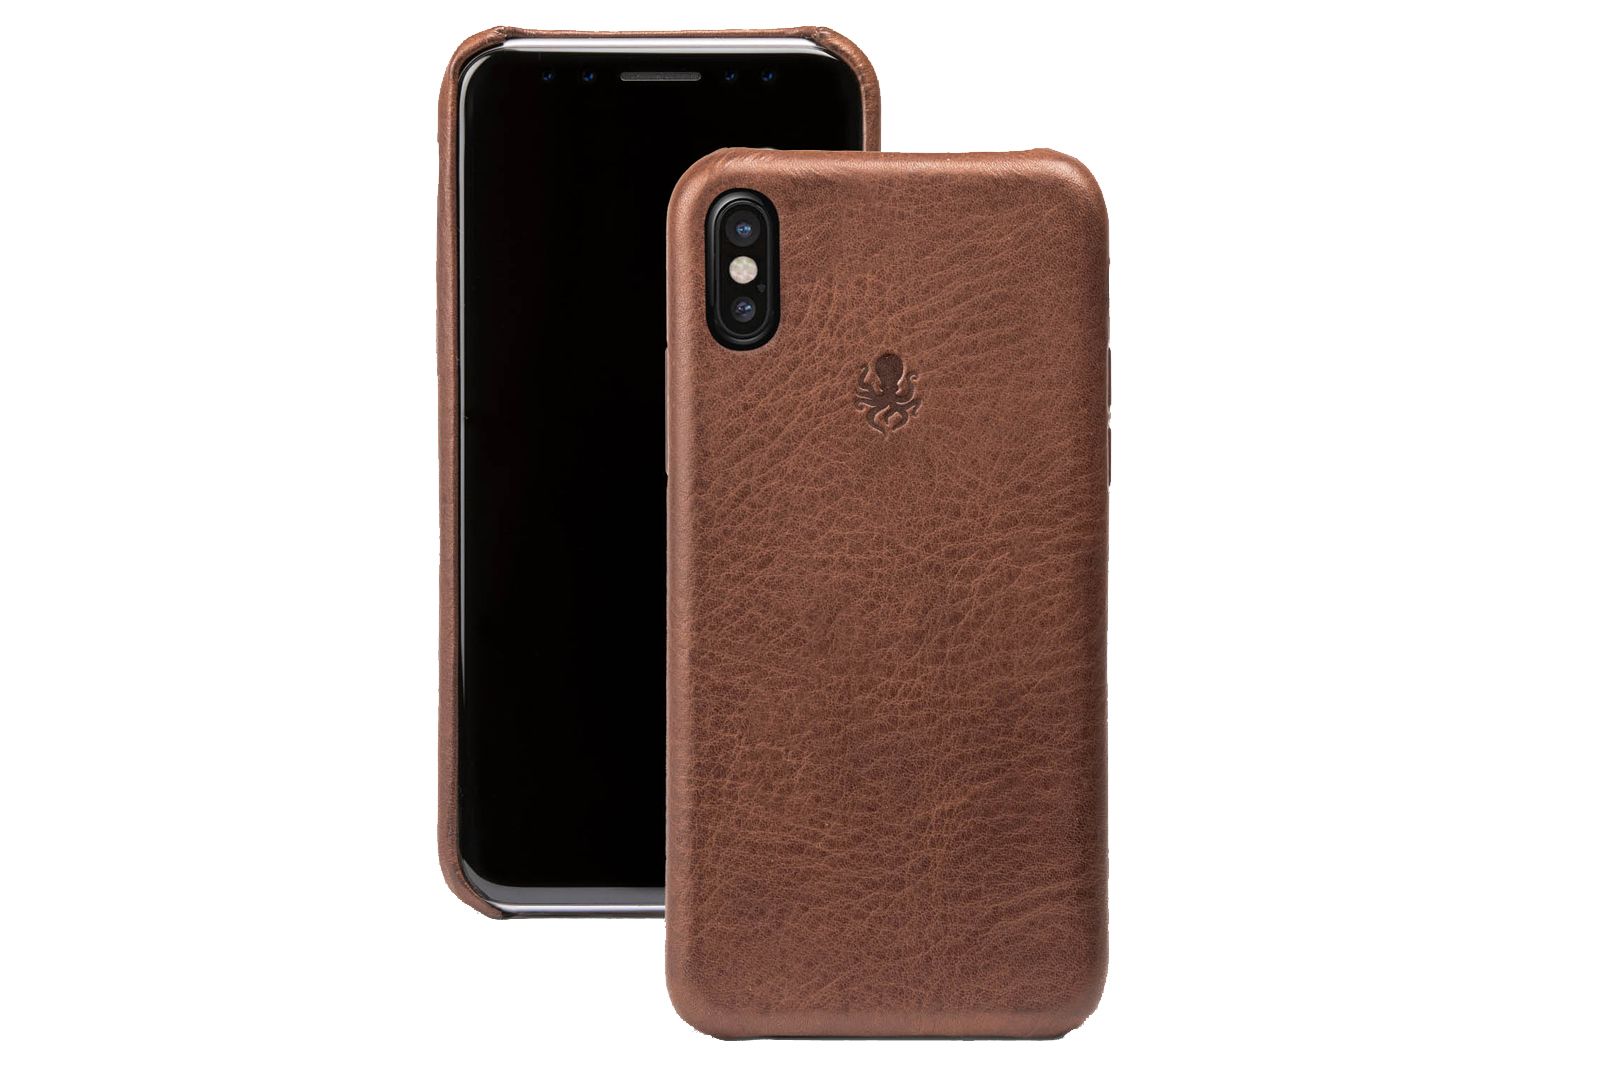 Best Iphone X Cases Protect Your New Apple Device image 9